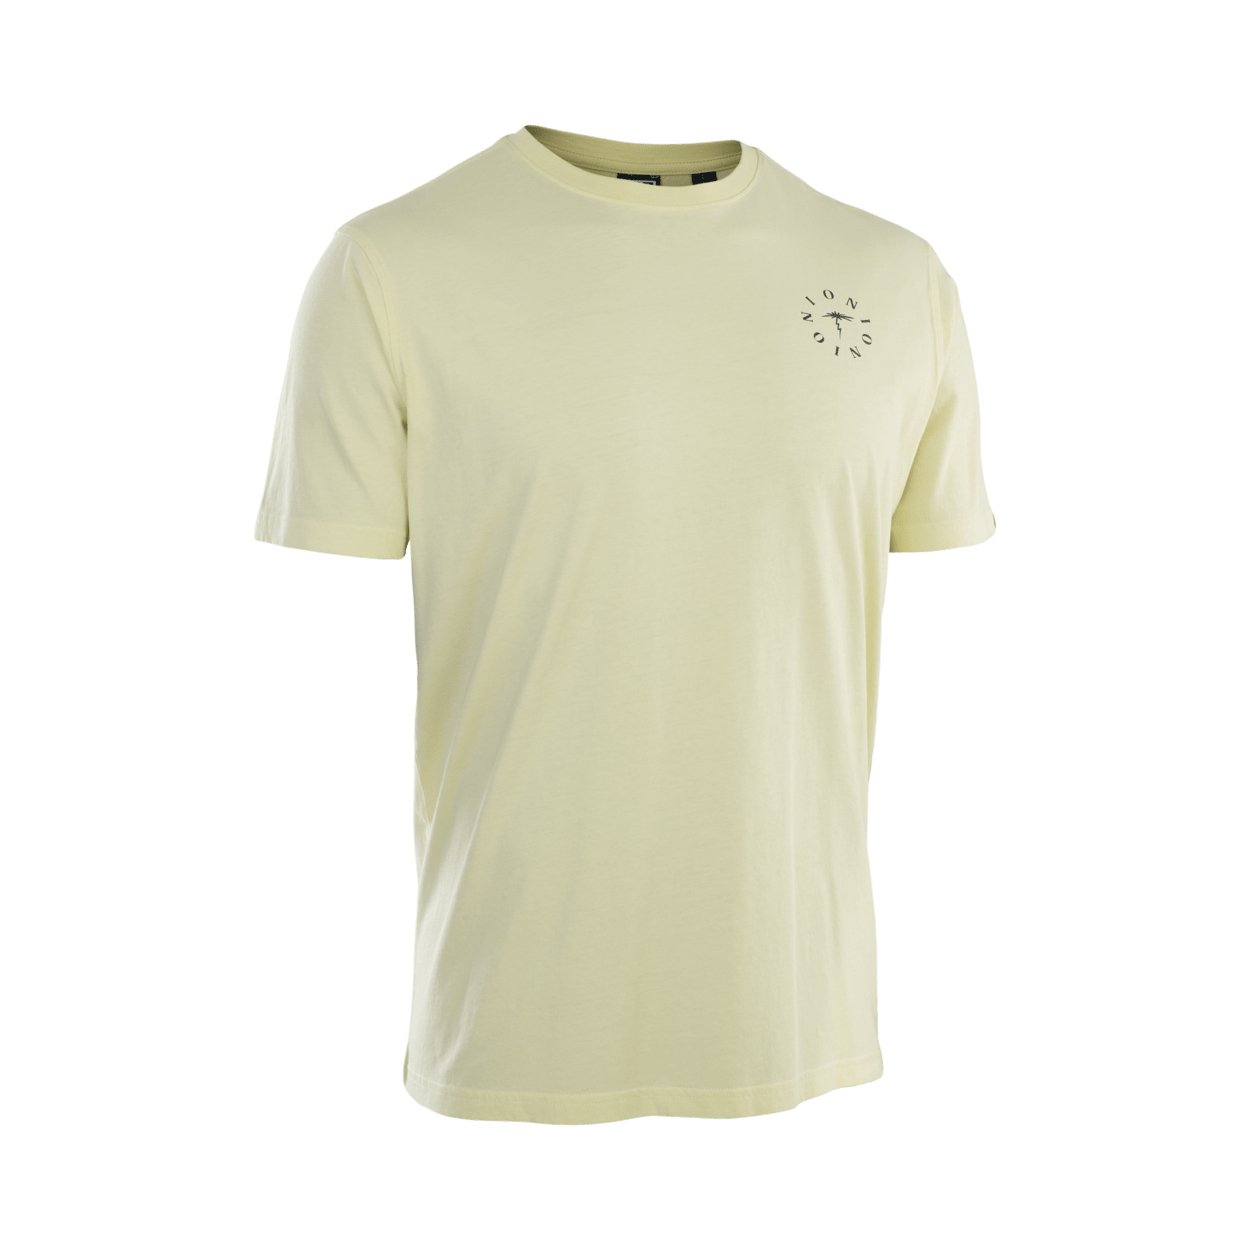 ION Tee Vibes SS men 2023 - Worthing Watersports - 9010583102757 - Apparel - ION Bike